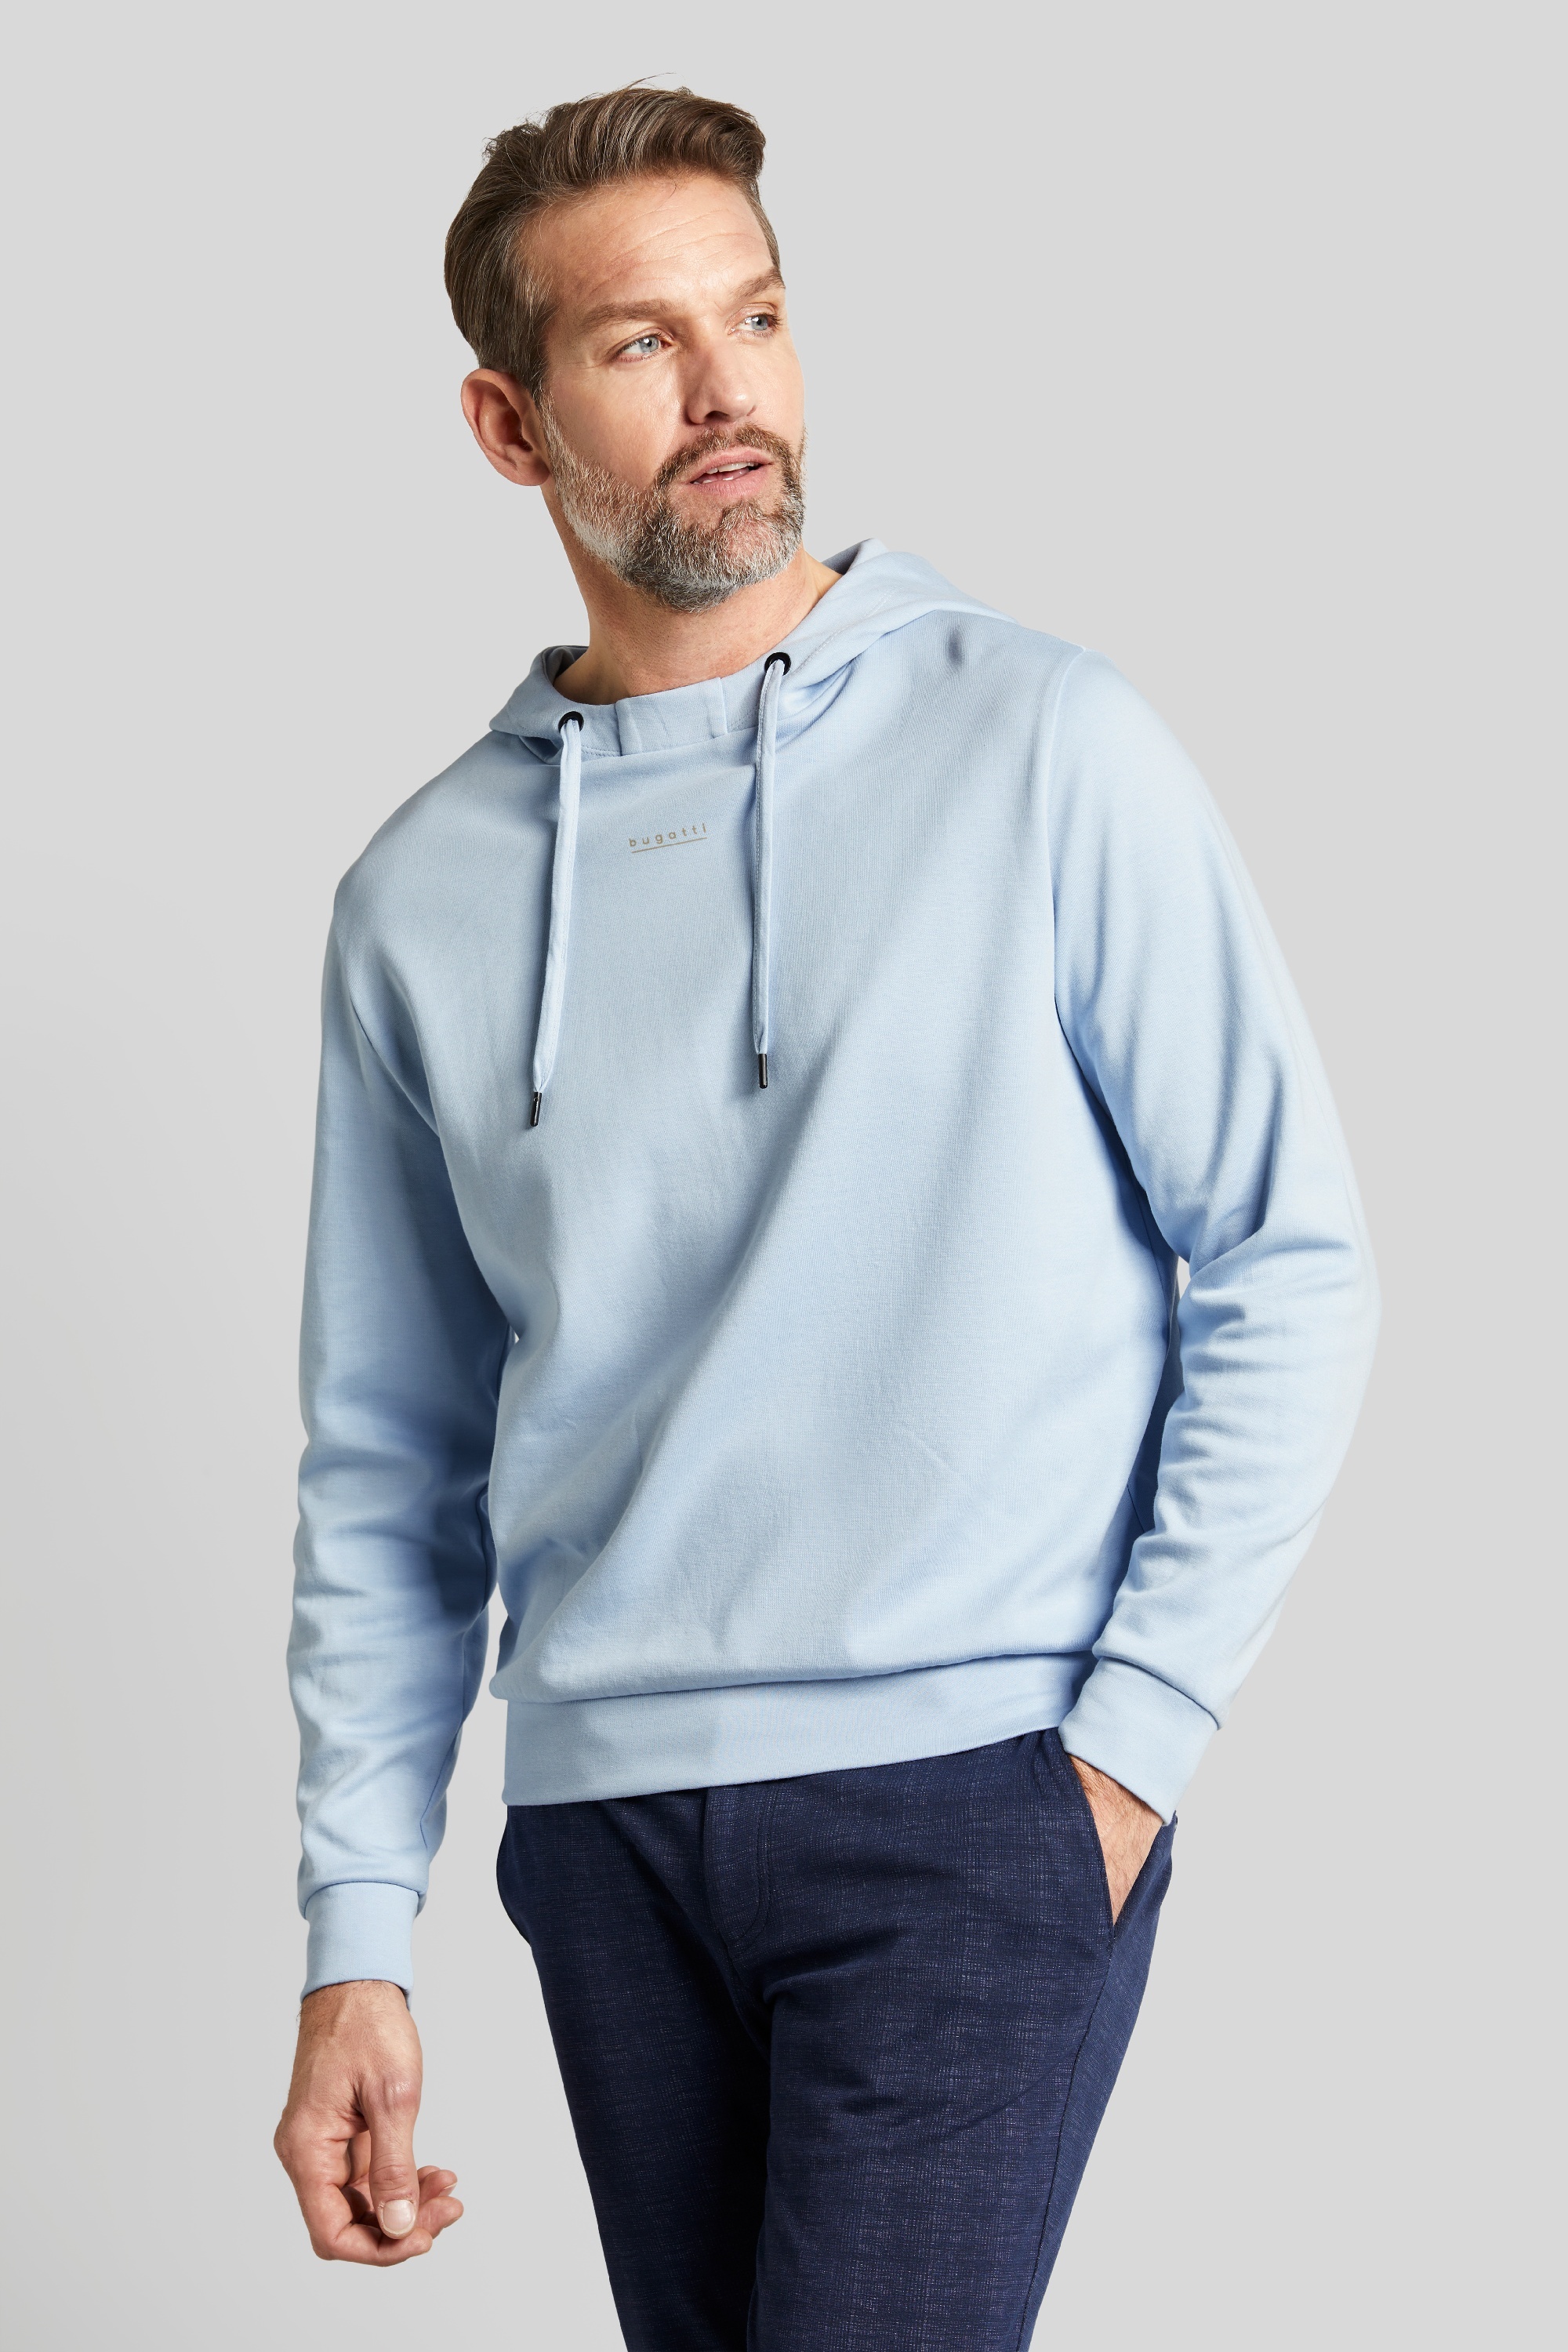 in print logo in | With bugatti gold light small sweatshirt Hooded blue